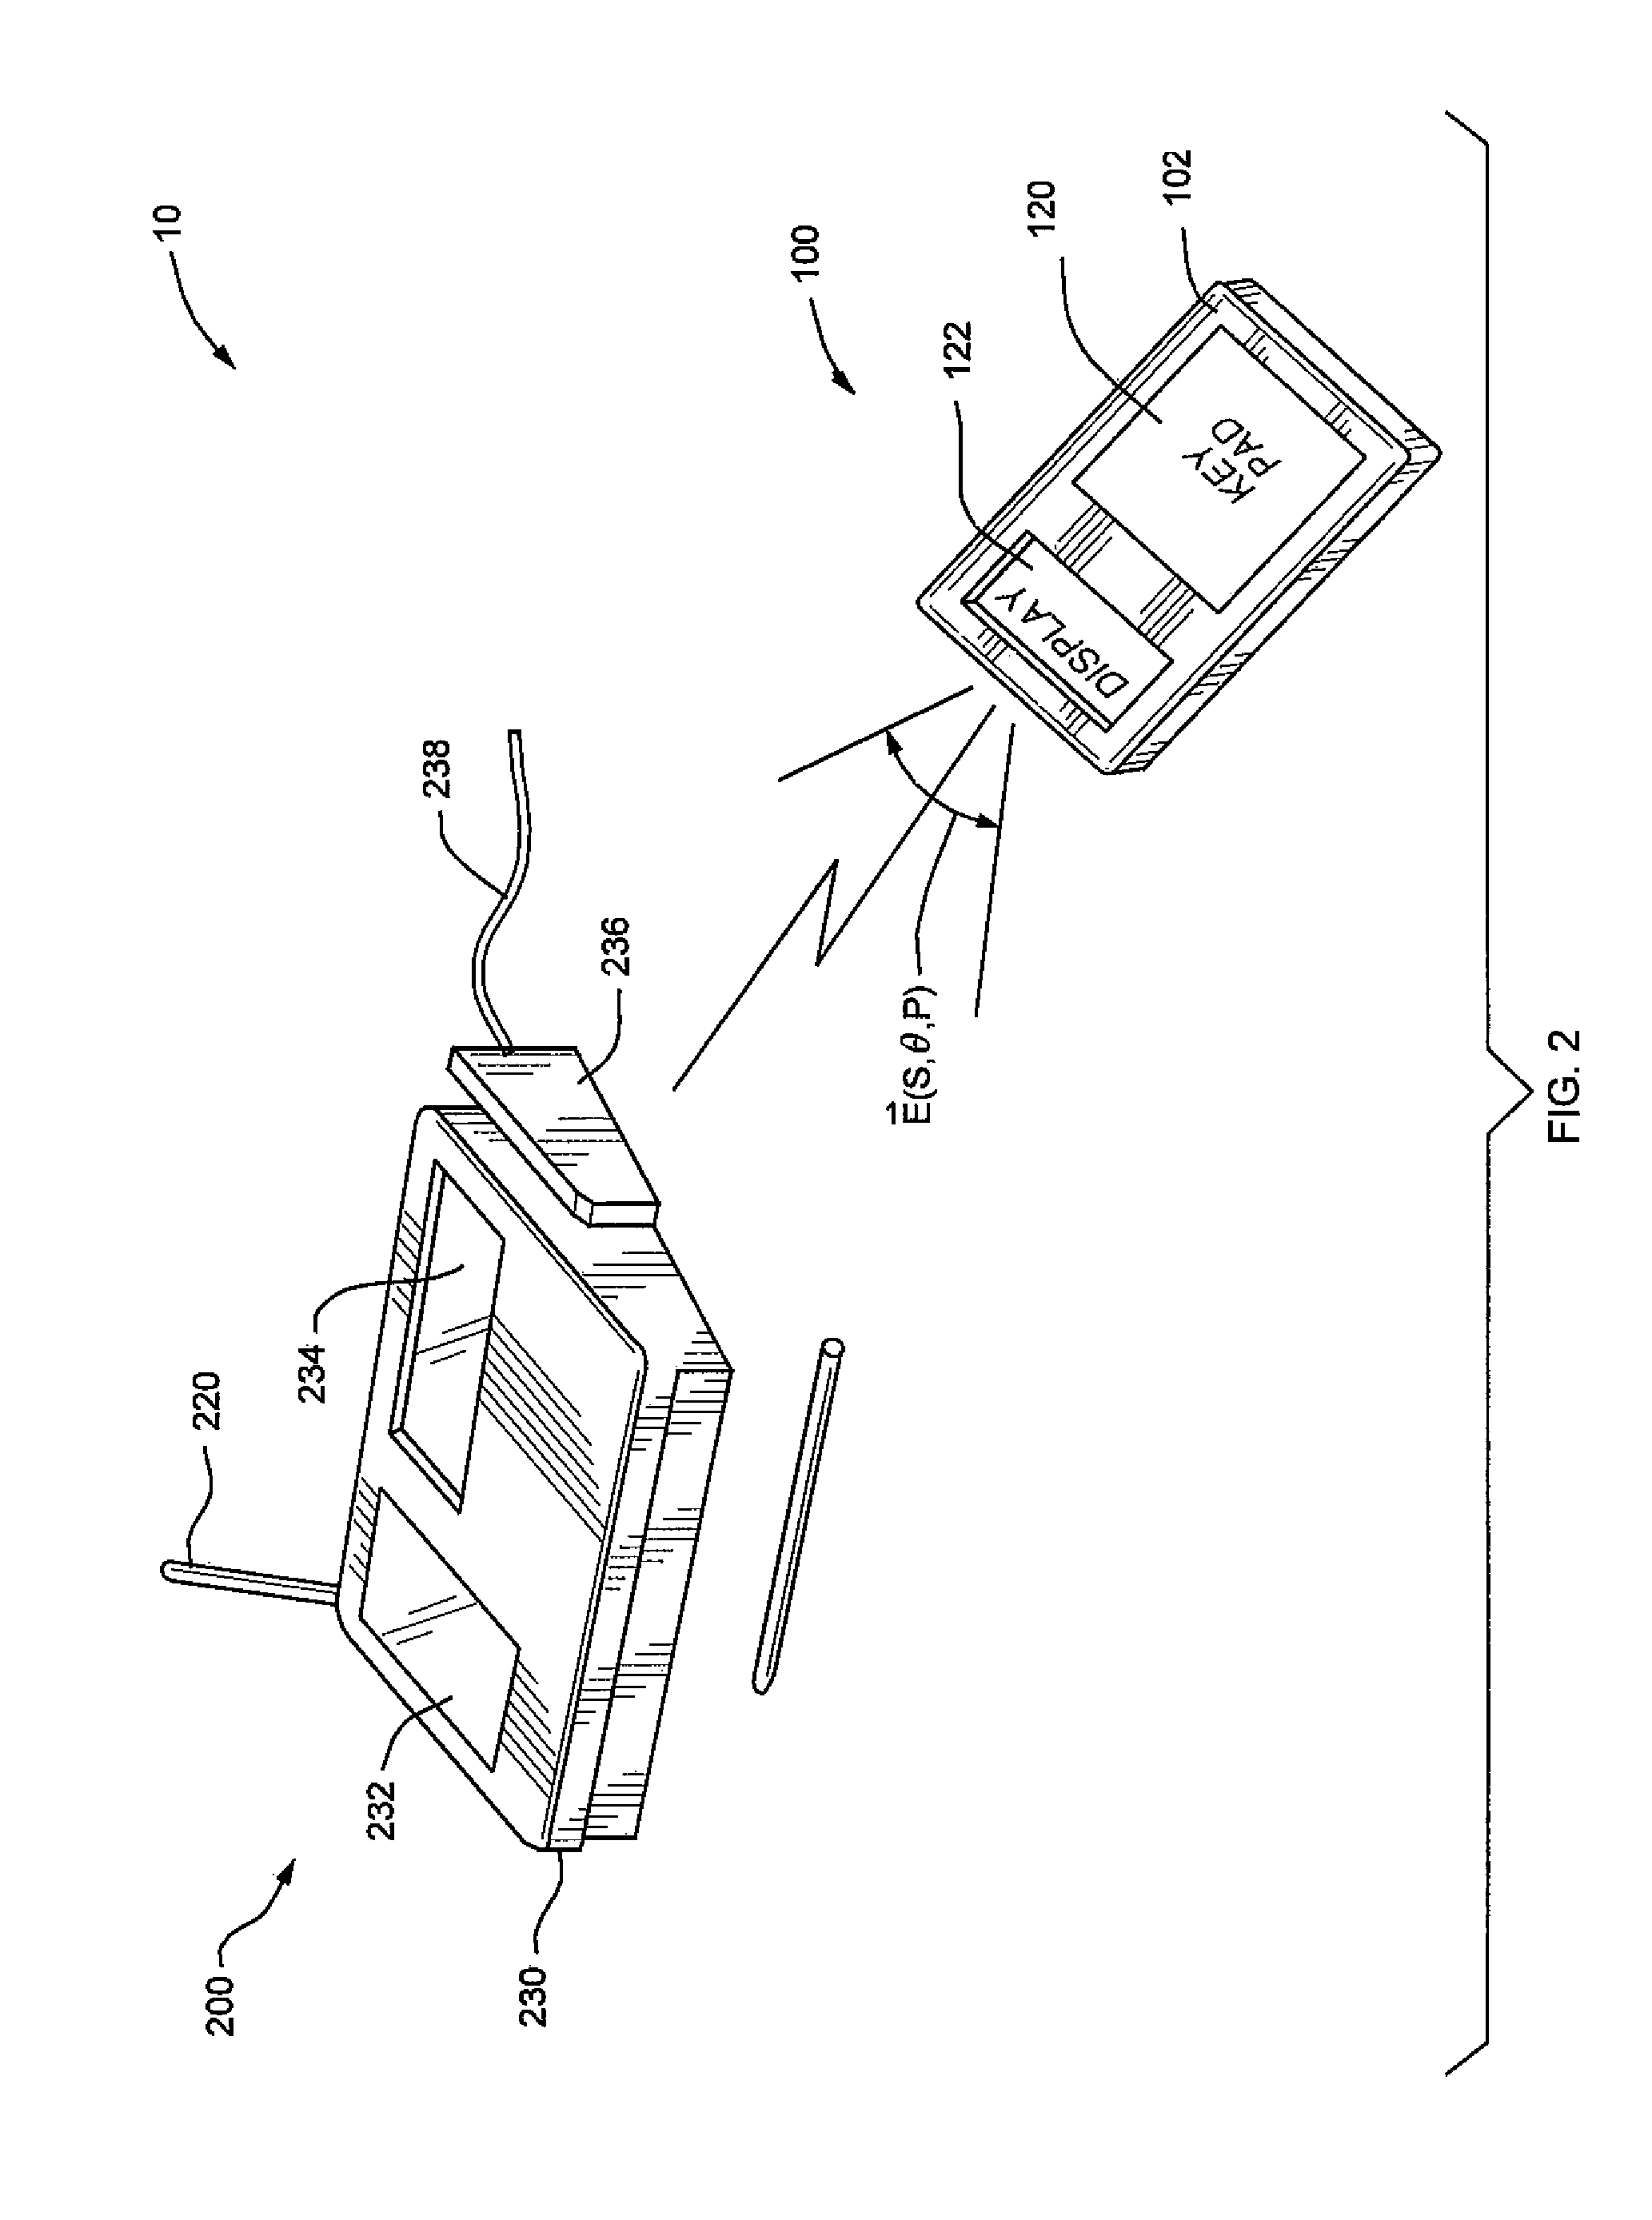 Portable keying device and method